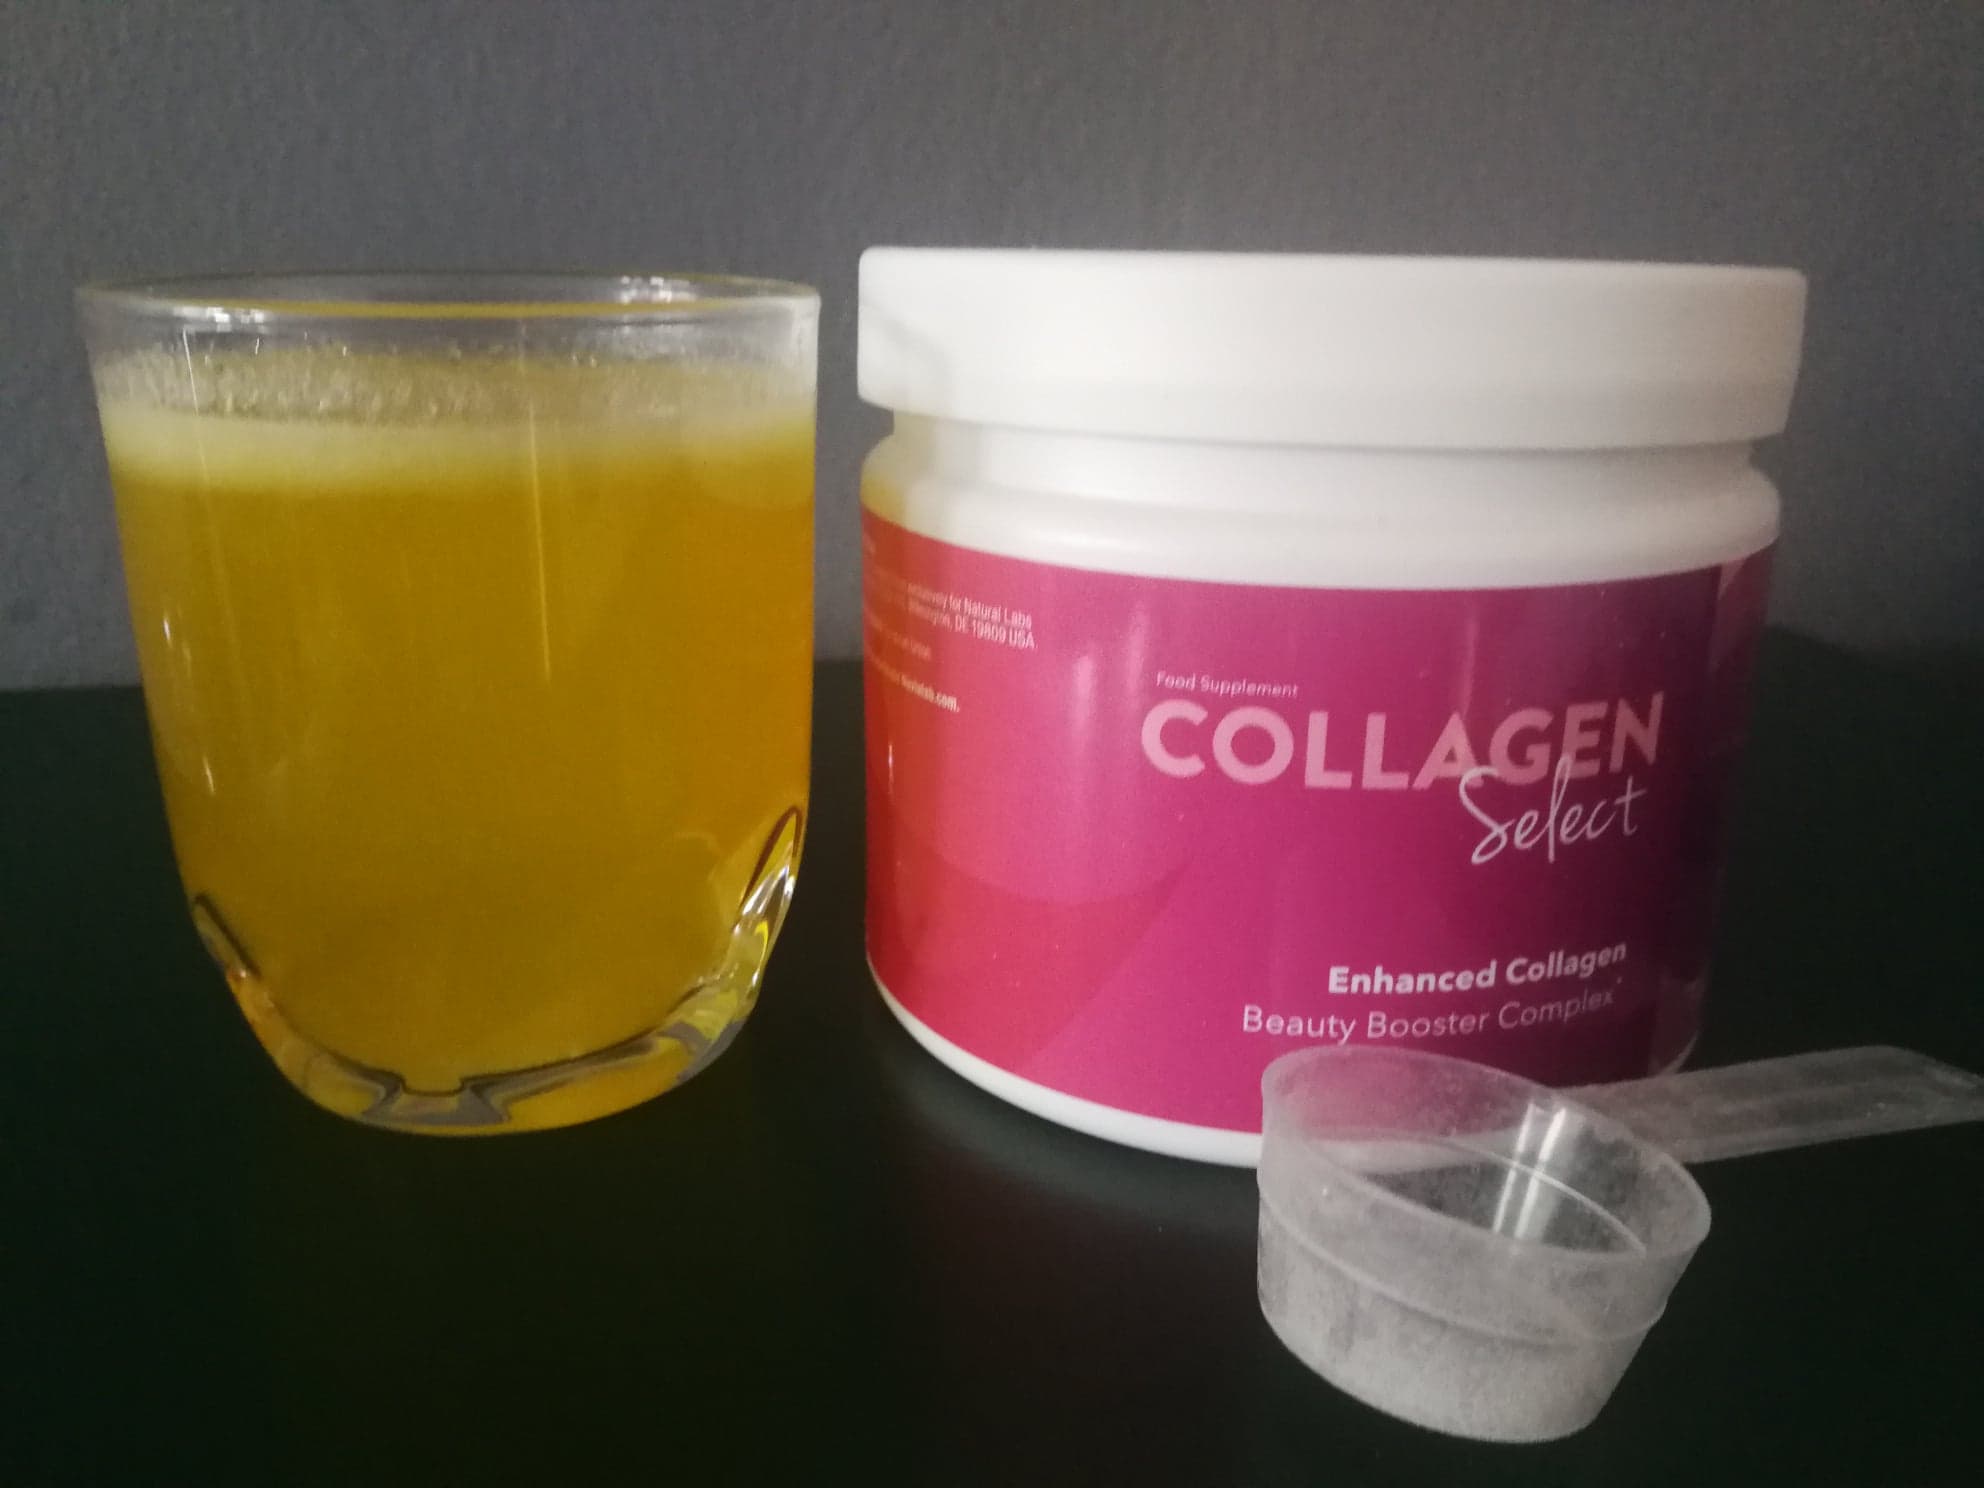 Collagen Select Beauty Booster Complex Reviews